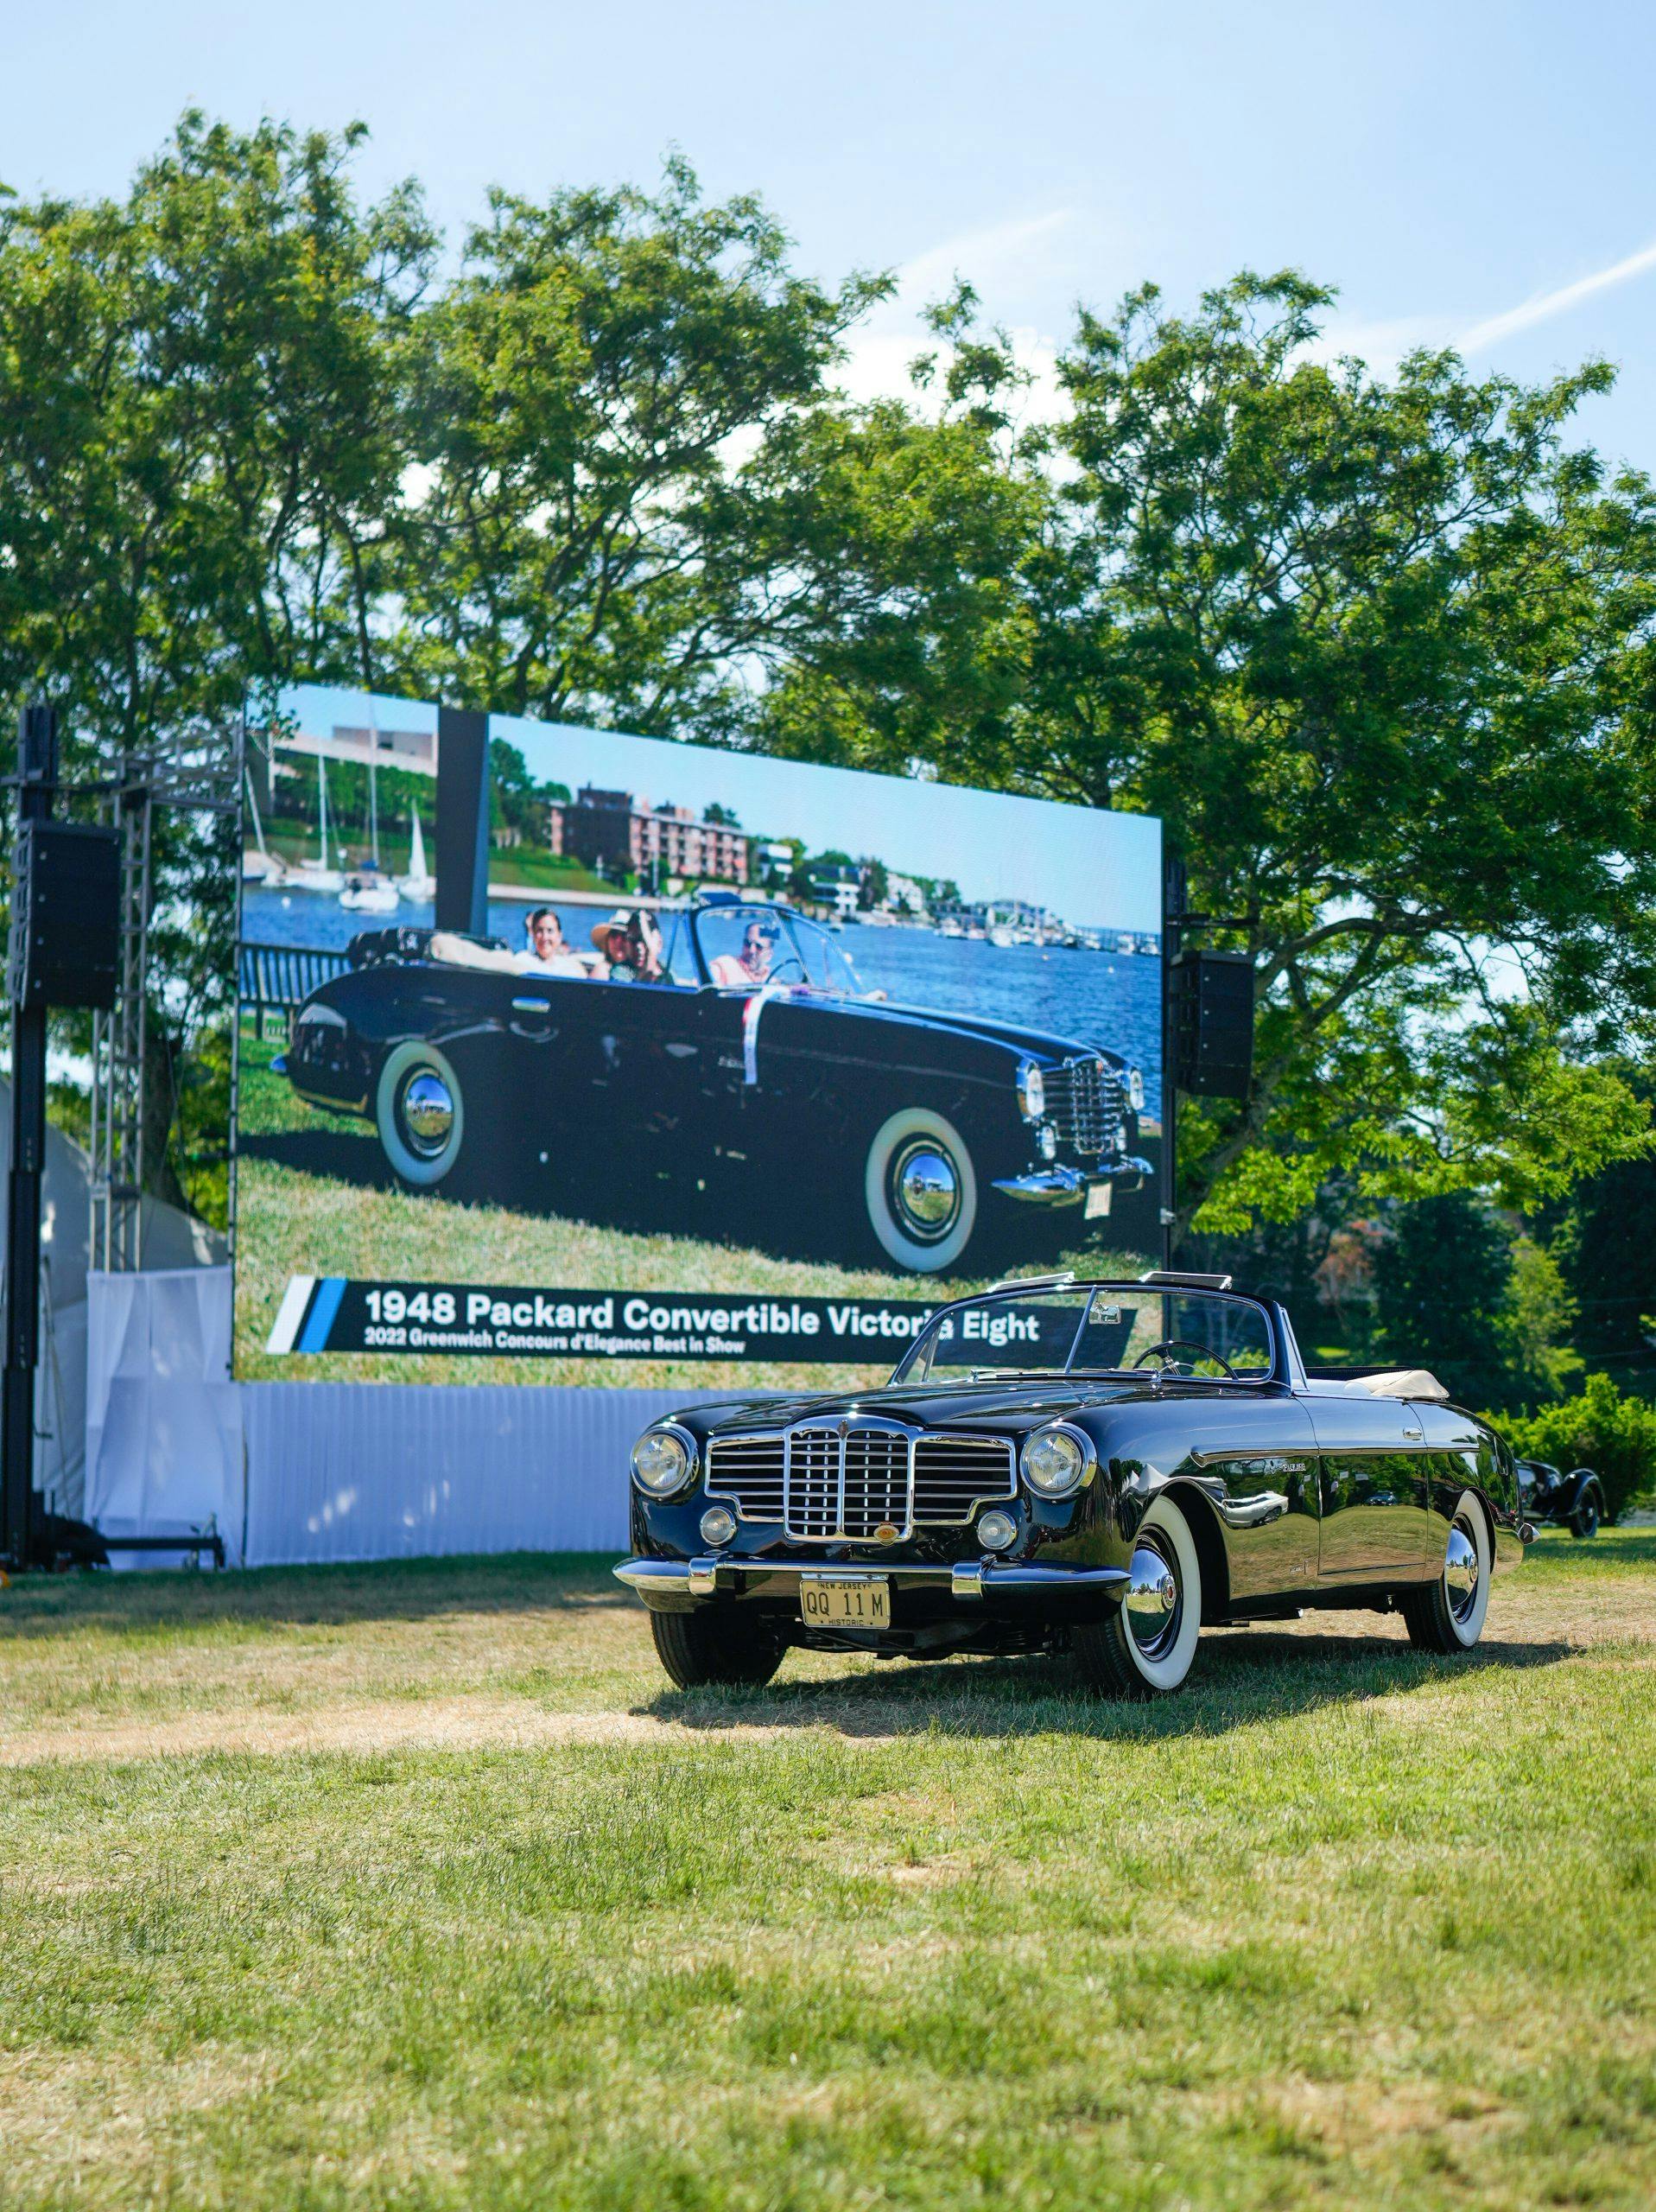 1948 Packard Victoria Convertible Eight by Vignale - 2022 Greenwich Best of Show - in front of Jumbotron